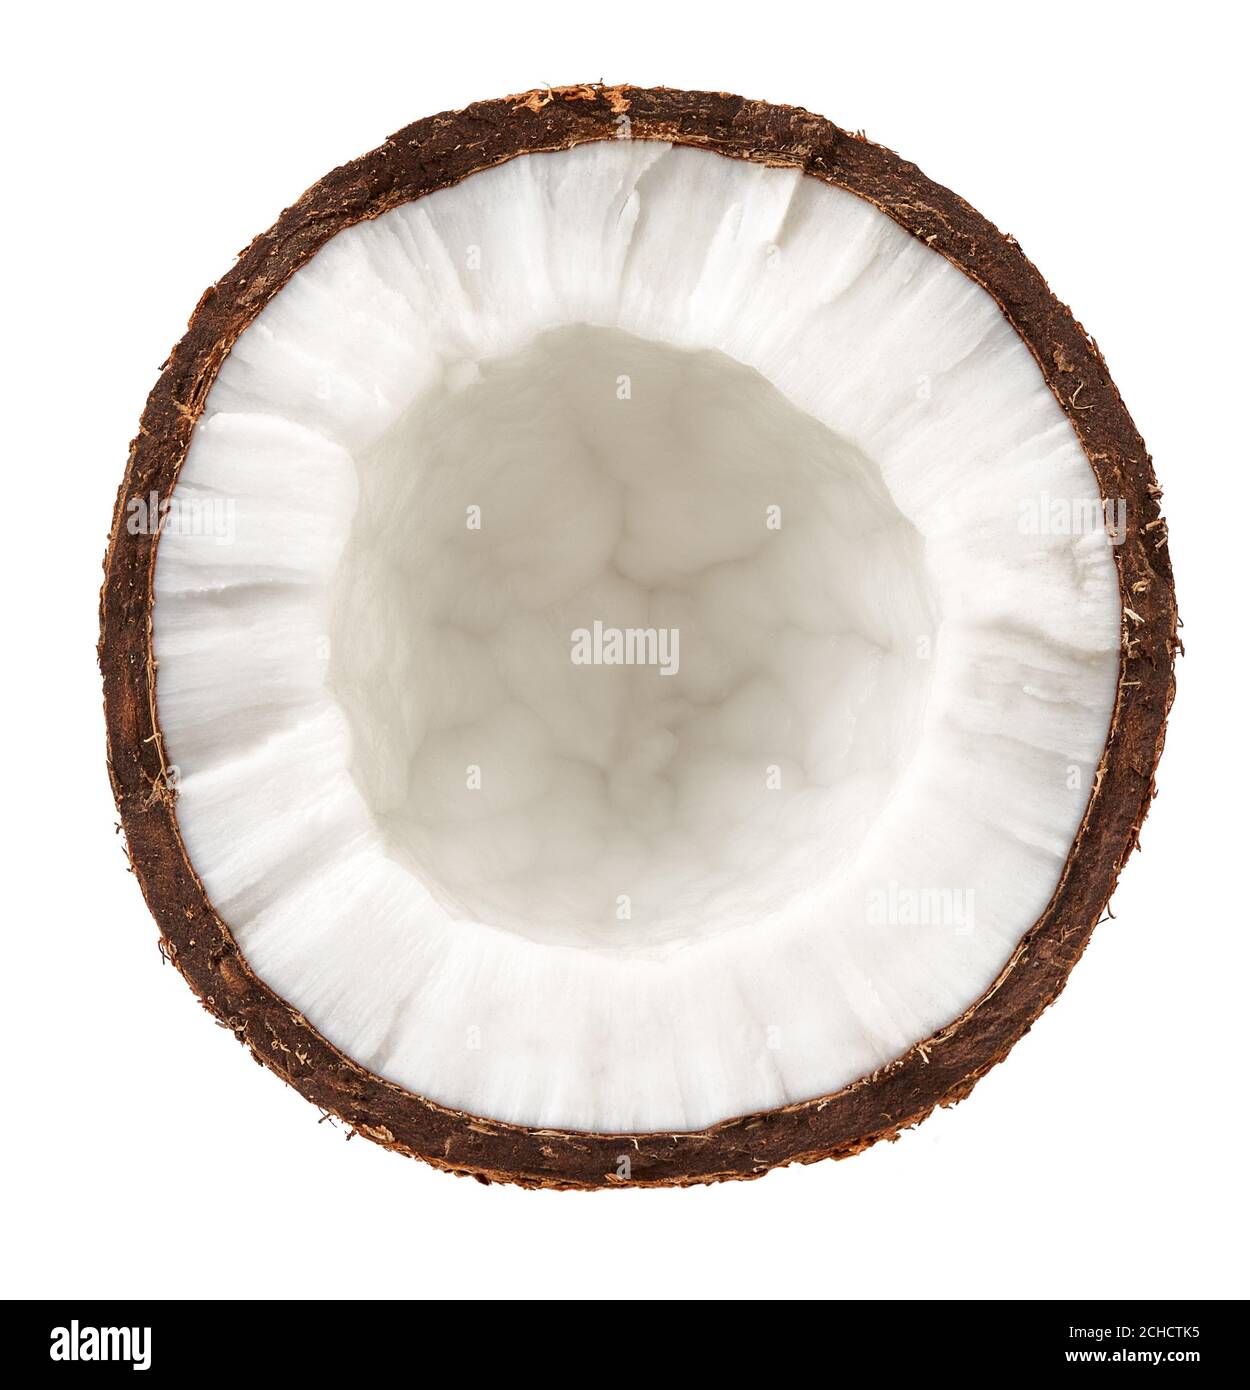 Half coconut isolated on white. Top view of coconut. Stock Photo